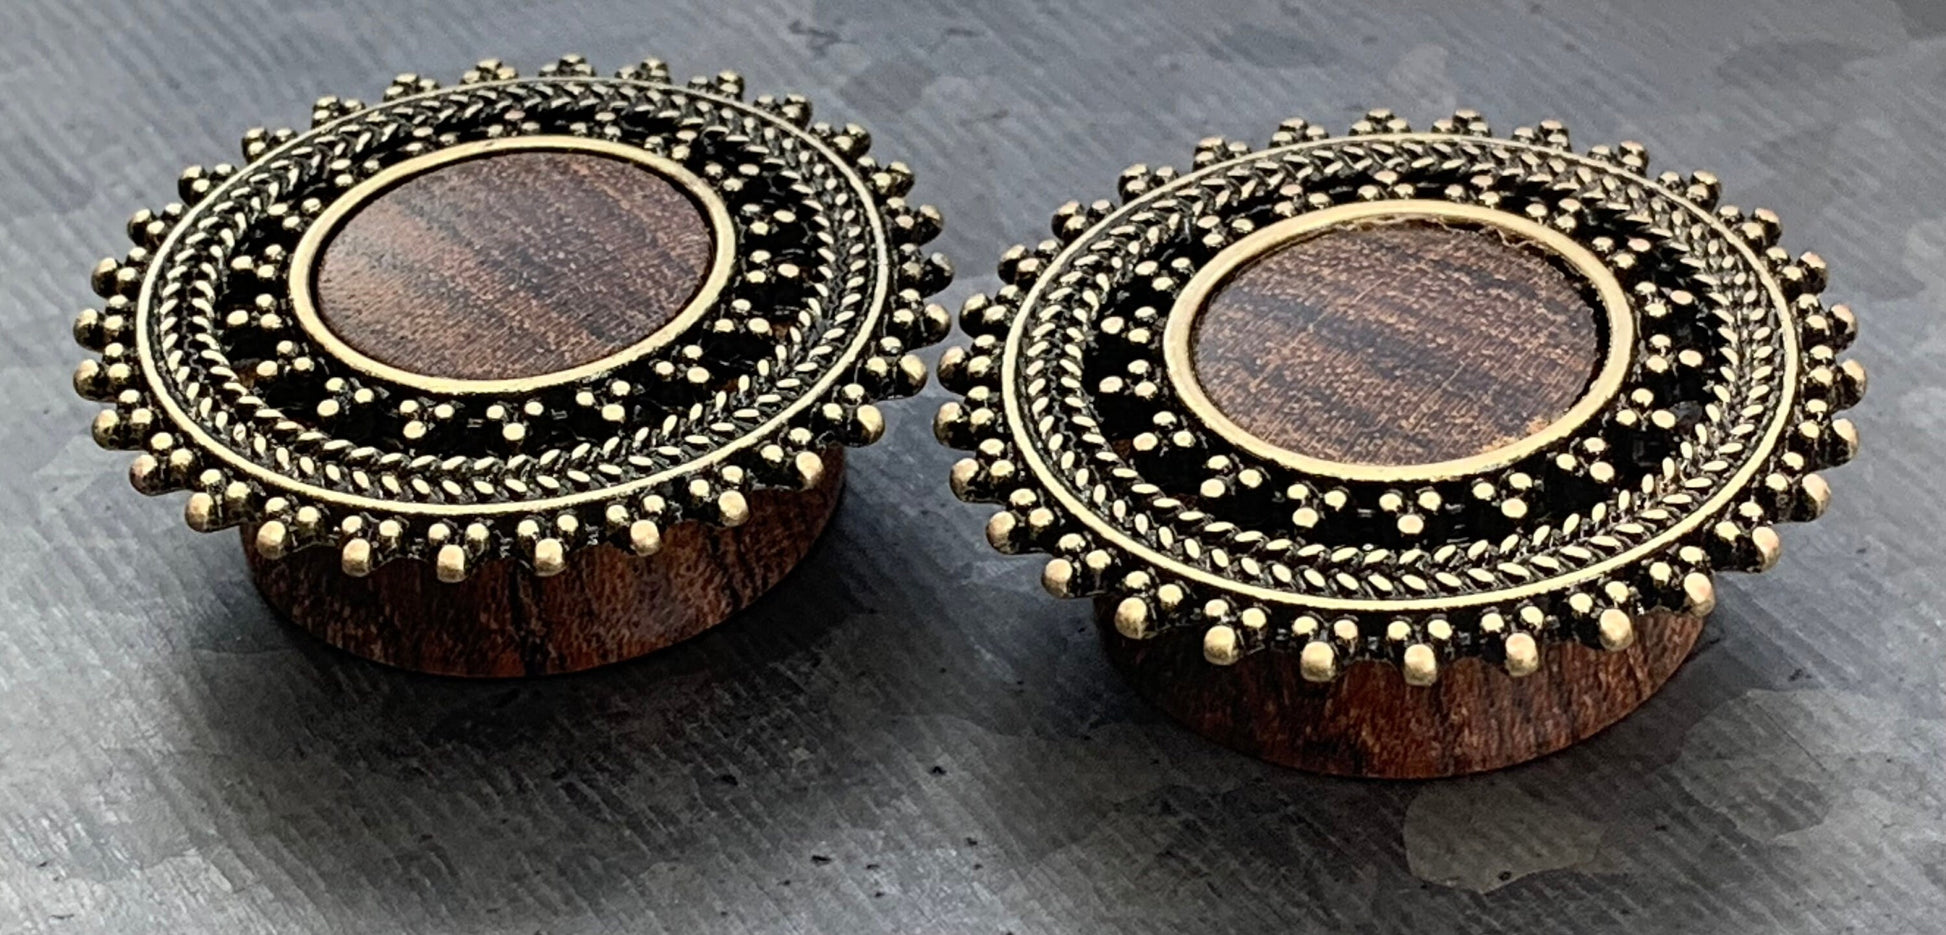 PAIR of Unique Tribal Lace Design Top Rose Wood Saddle Plugs - ONE left in 22mm!